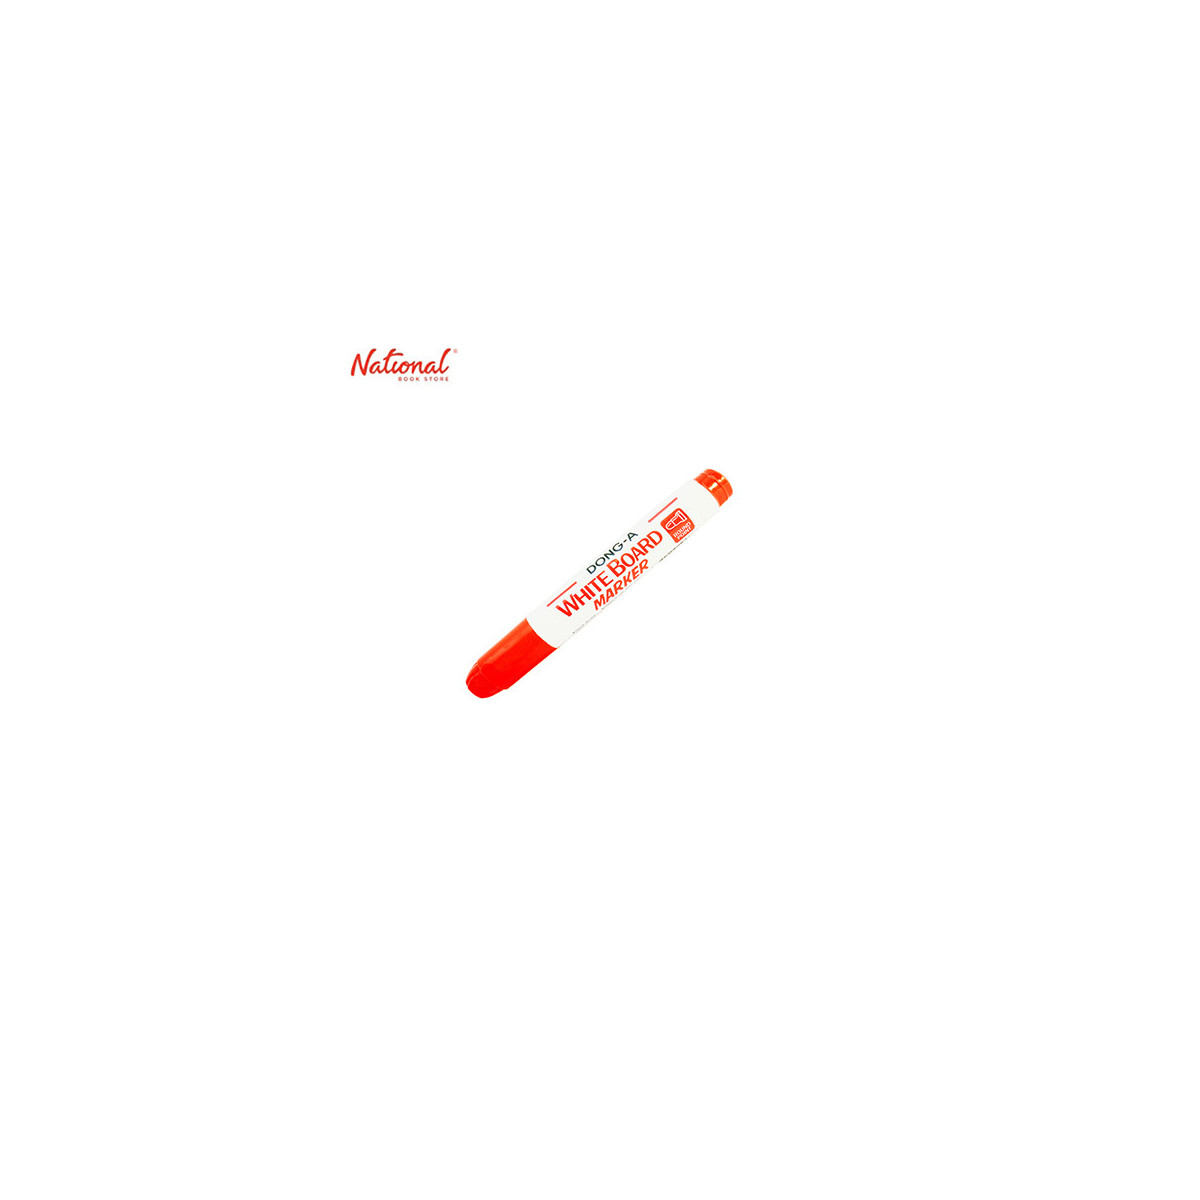 DONG-A WHITEBOARD MARKER, RED